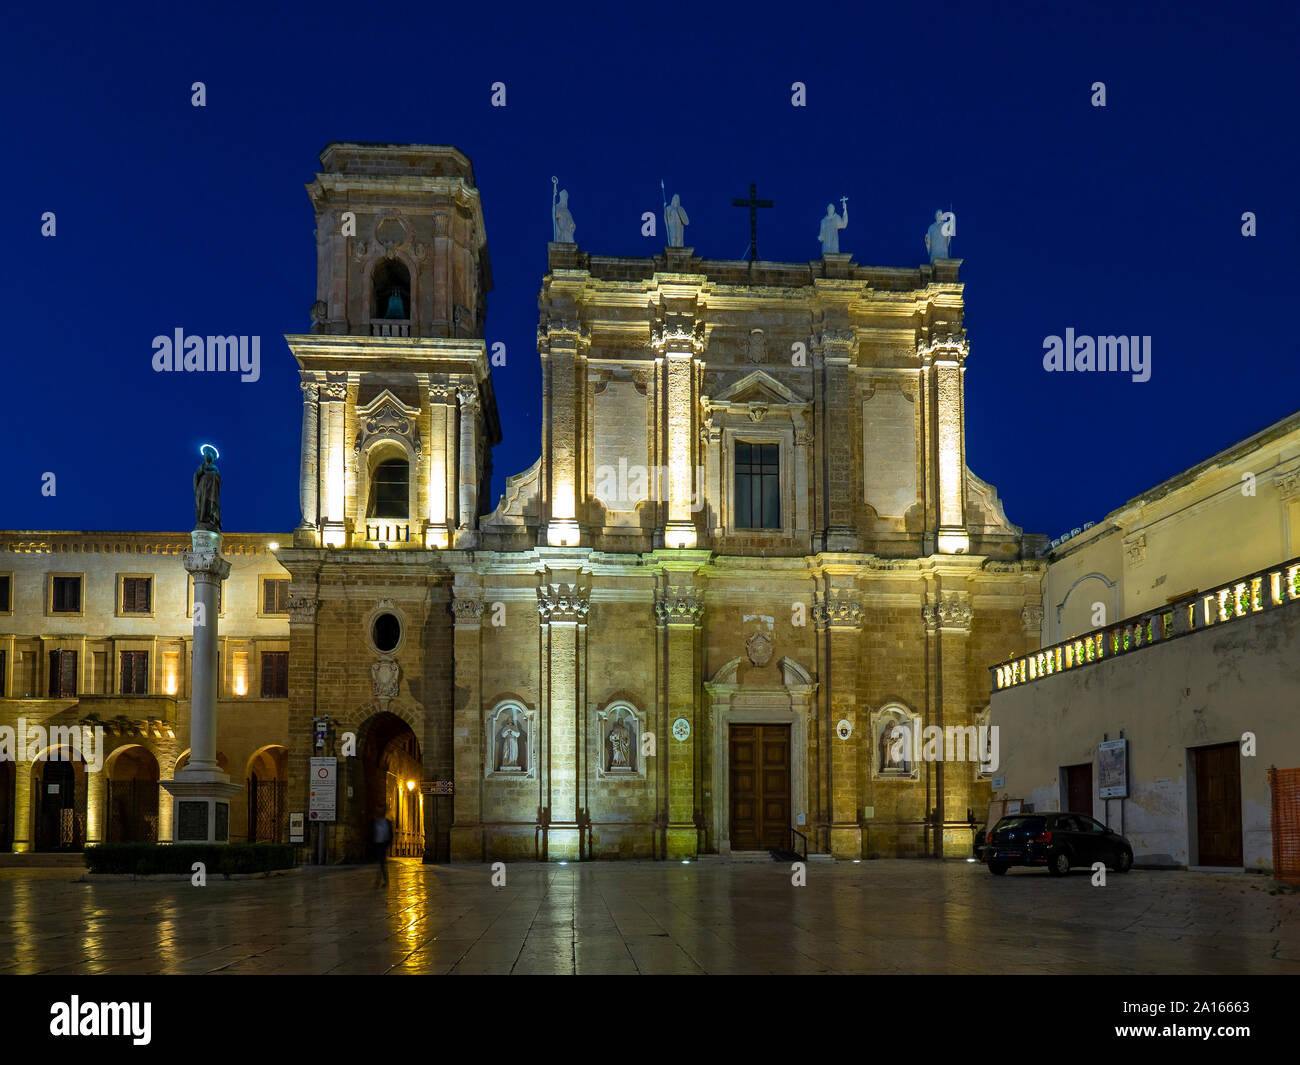 Facade of illuminated cathedral in Brindisi against clear sky at night Stock Photo